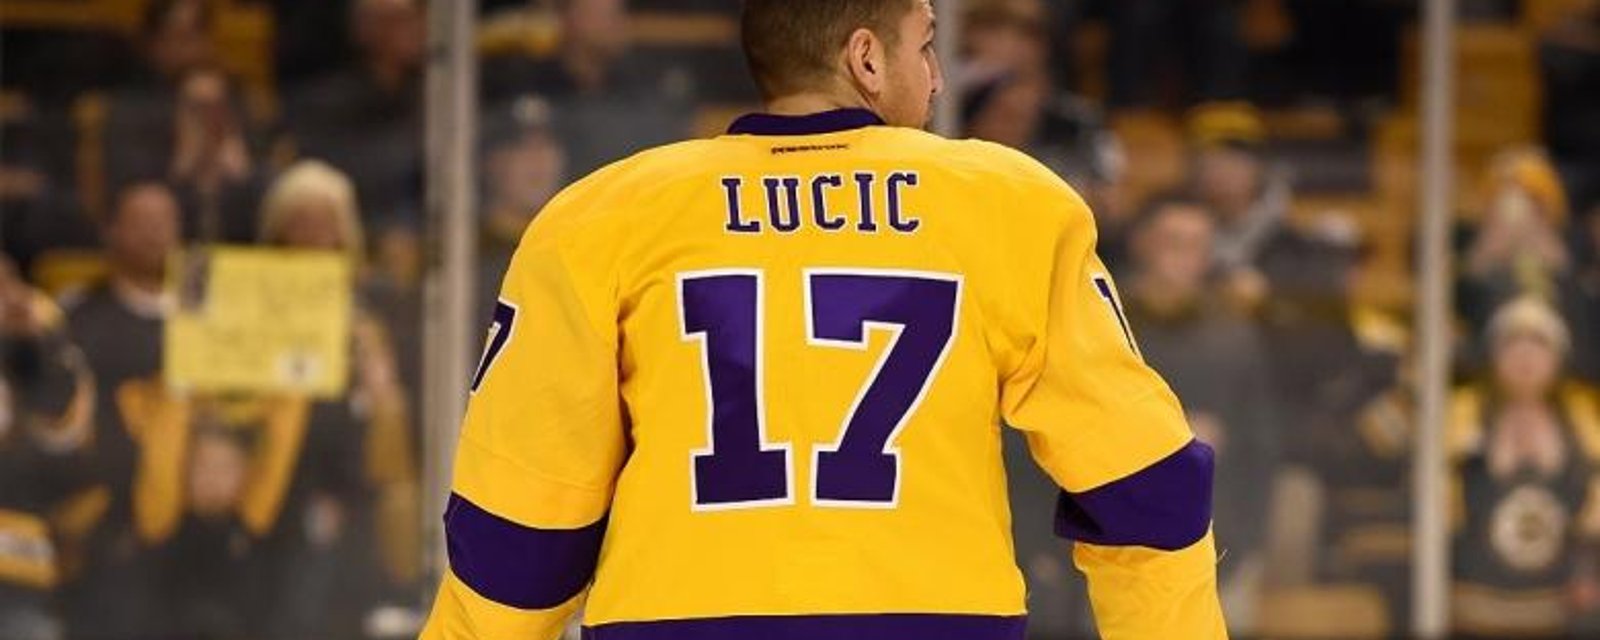 NHL legend played significant role in recruiting Lucic to Edmonton.